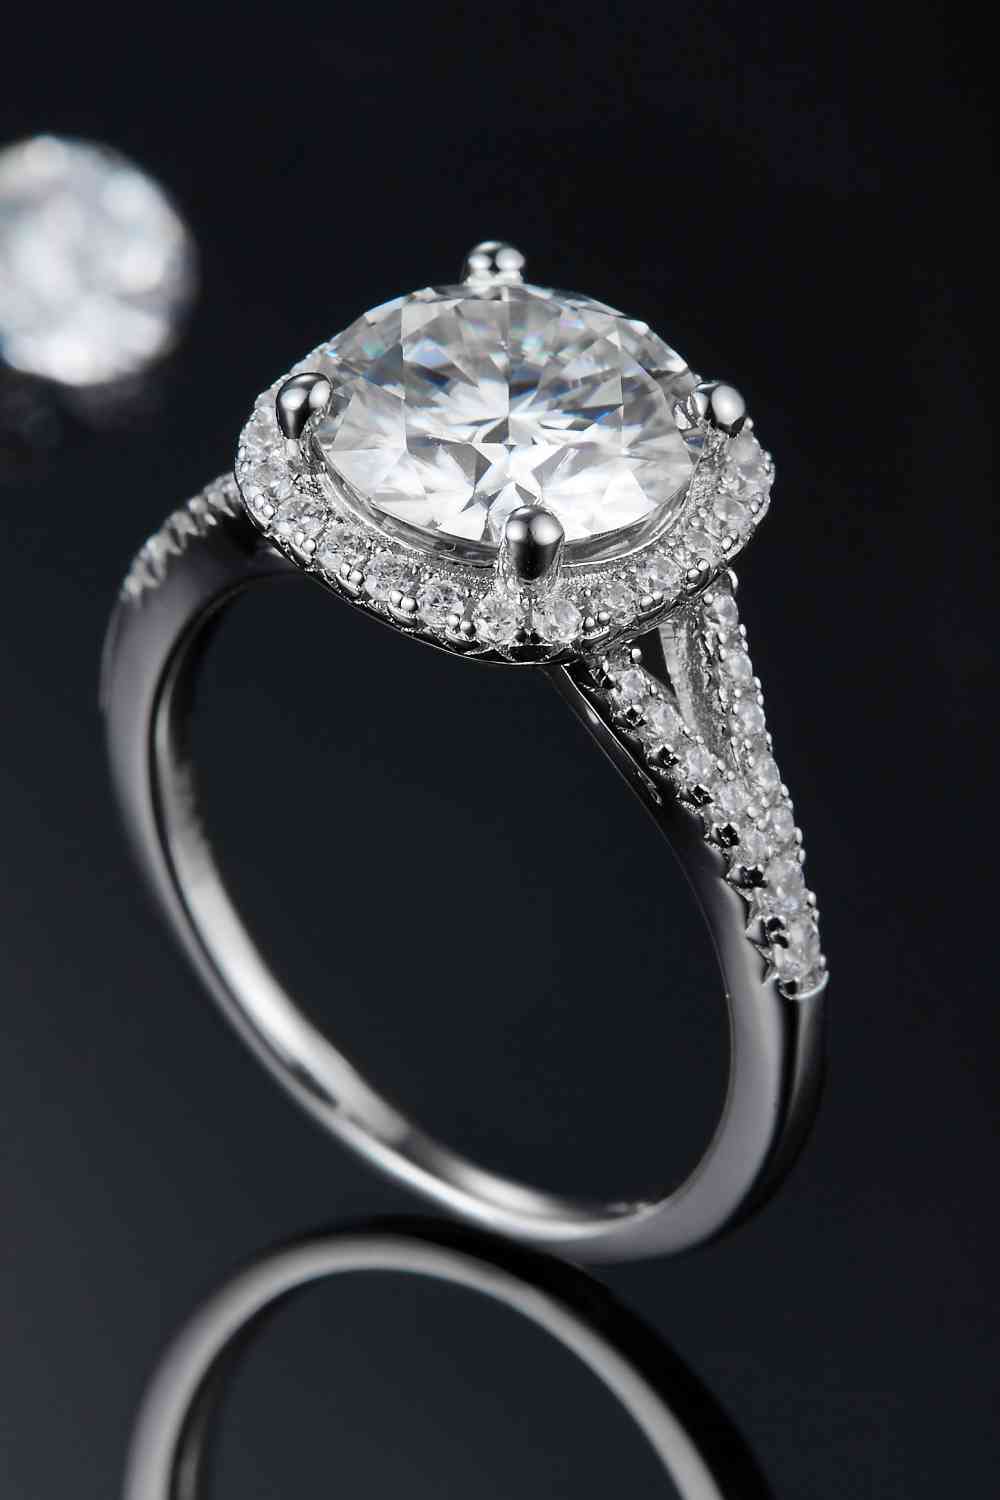 3 Carat Moissanite Halo Ring - Shop Tophatter Deals, Electronics, Fashion, Jewelry, Health, Beauty, Home Decor, Free Shipping